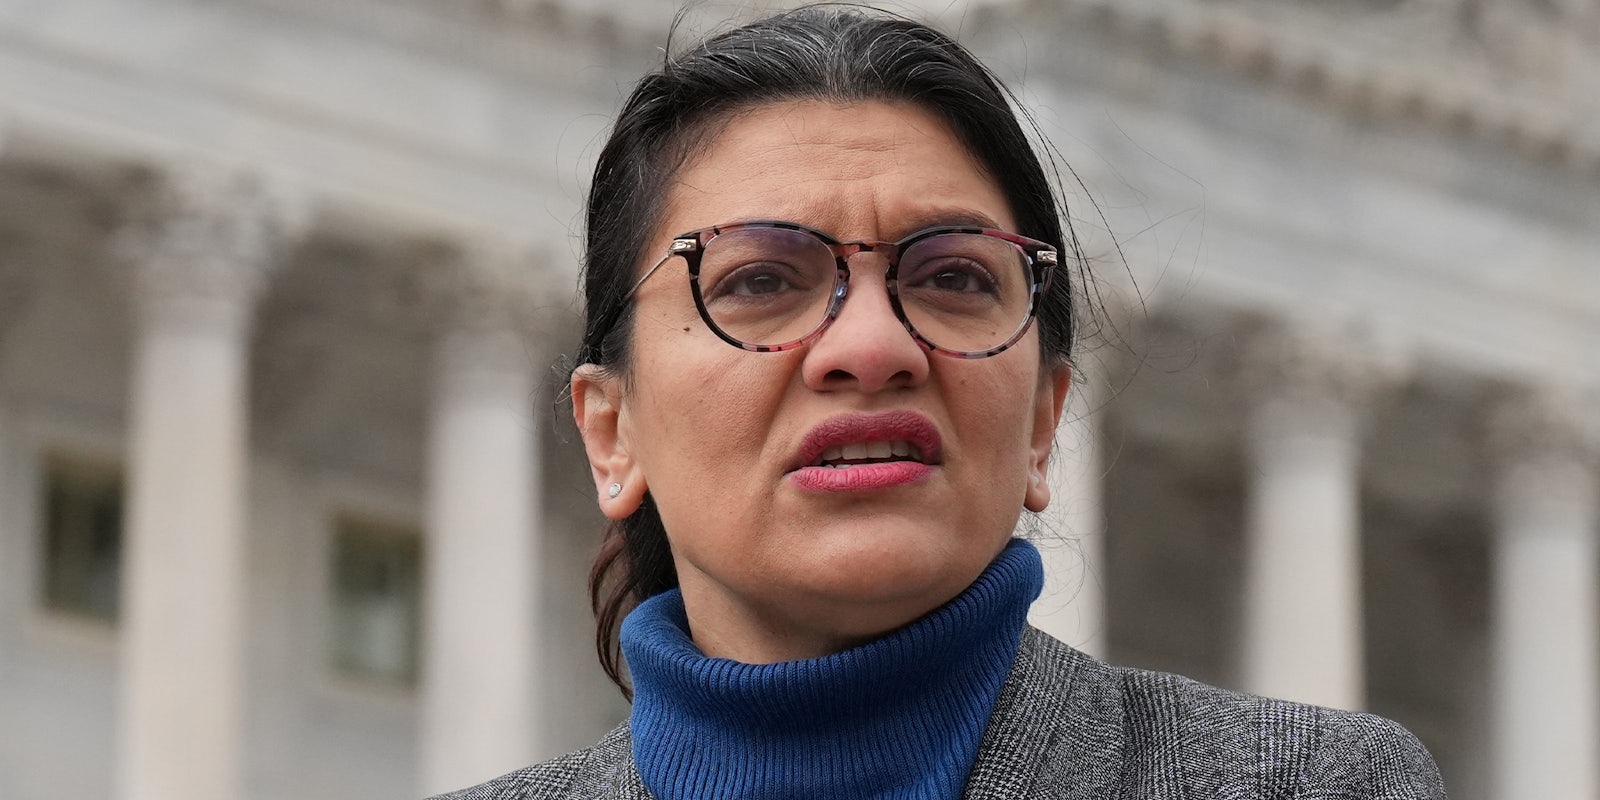 Pro-Israel activist muses about shooting Rashida Tlaib during an X Spaces